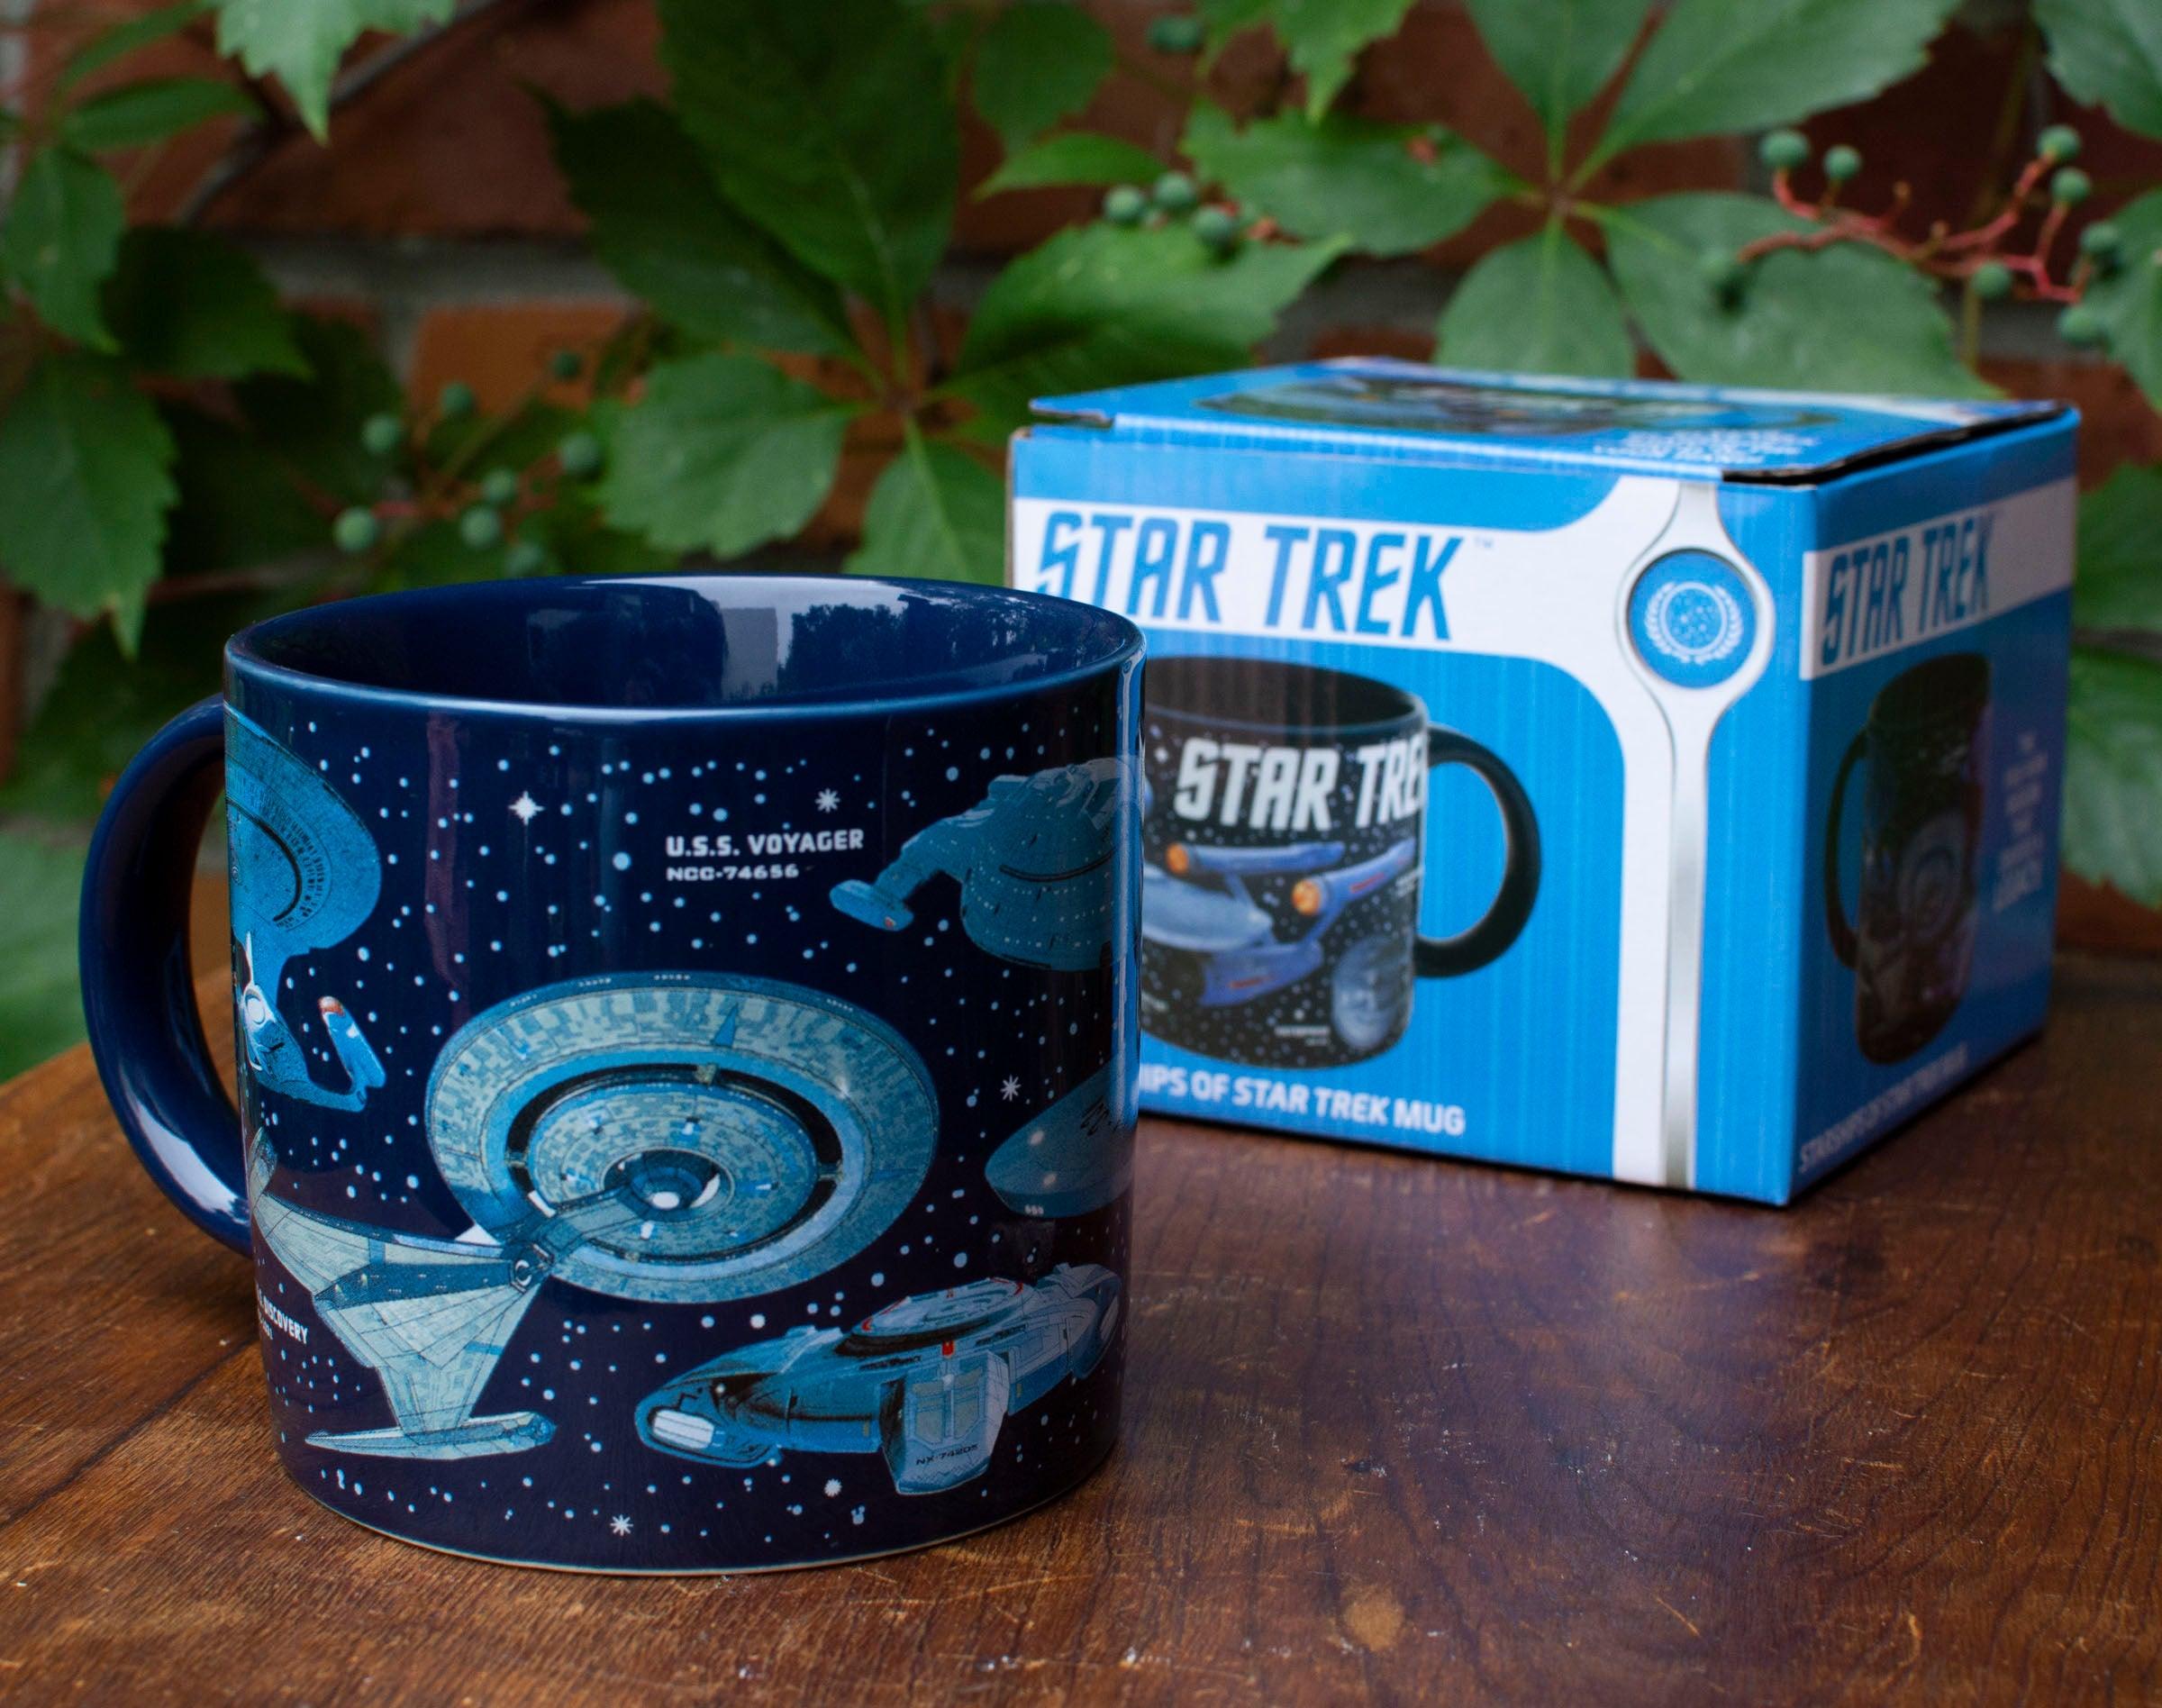 Starships of Star Trek Mug  Smart and Funny Gifts by UPG – The